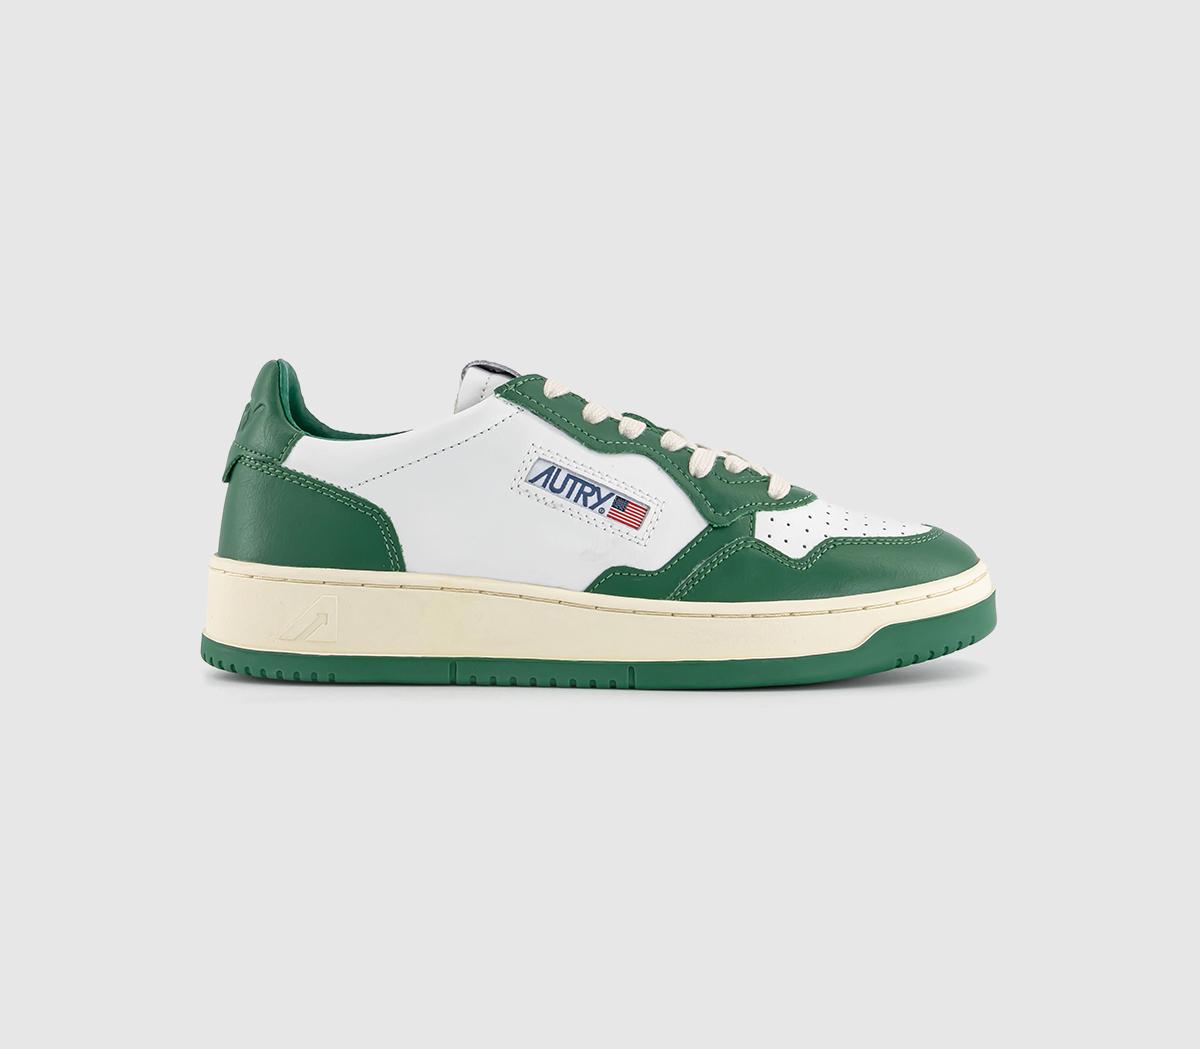 AUTRYMedalist Low TrainersLeather White Green Green